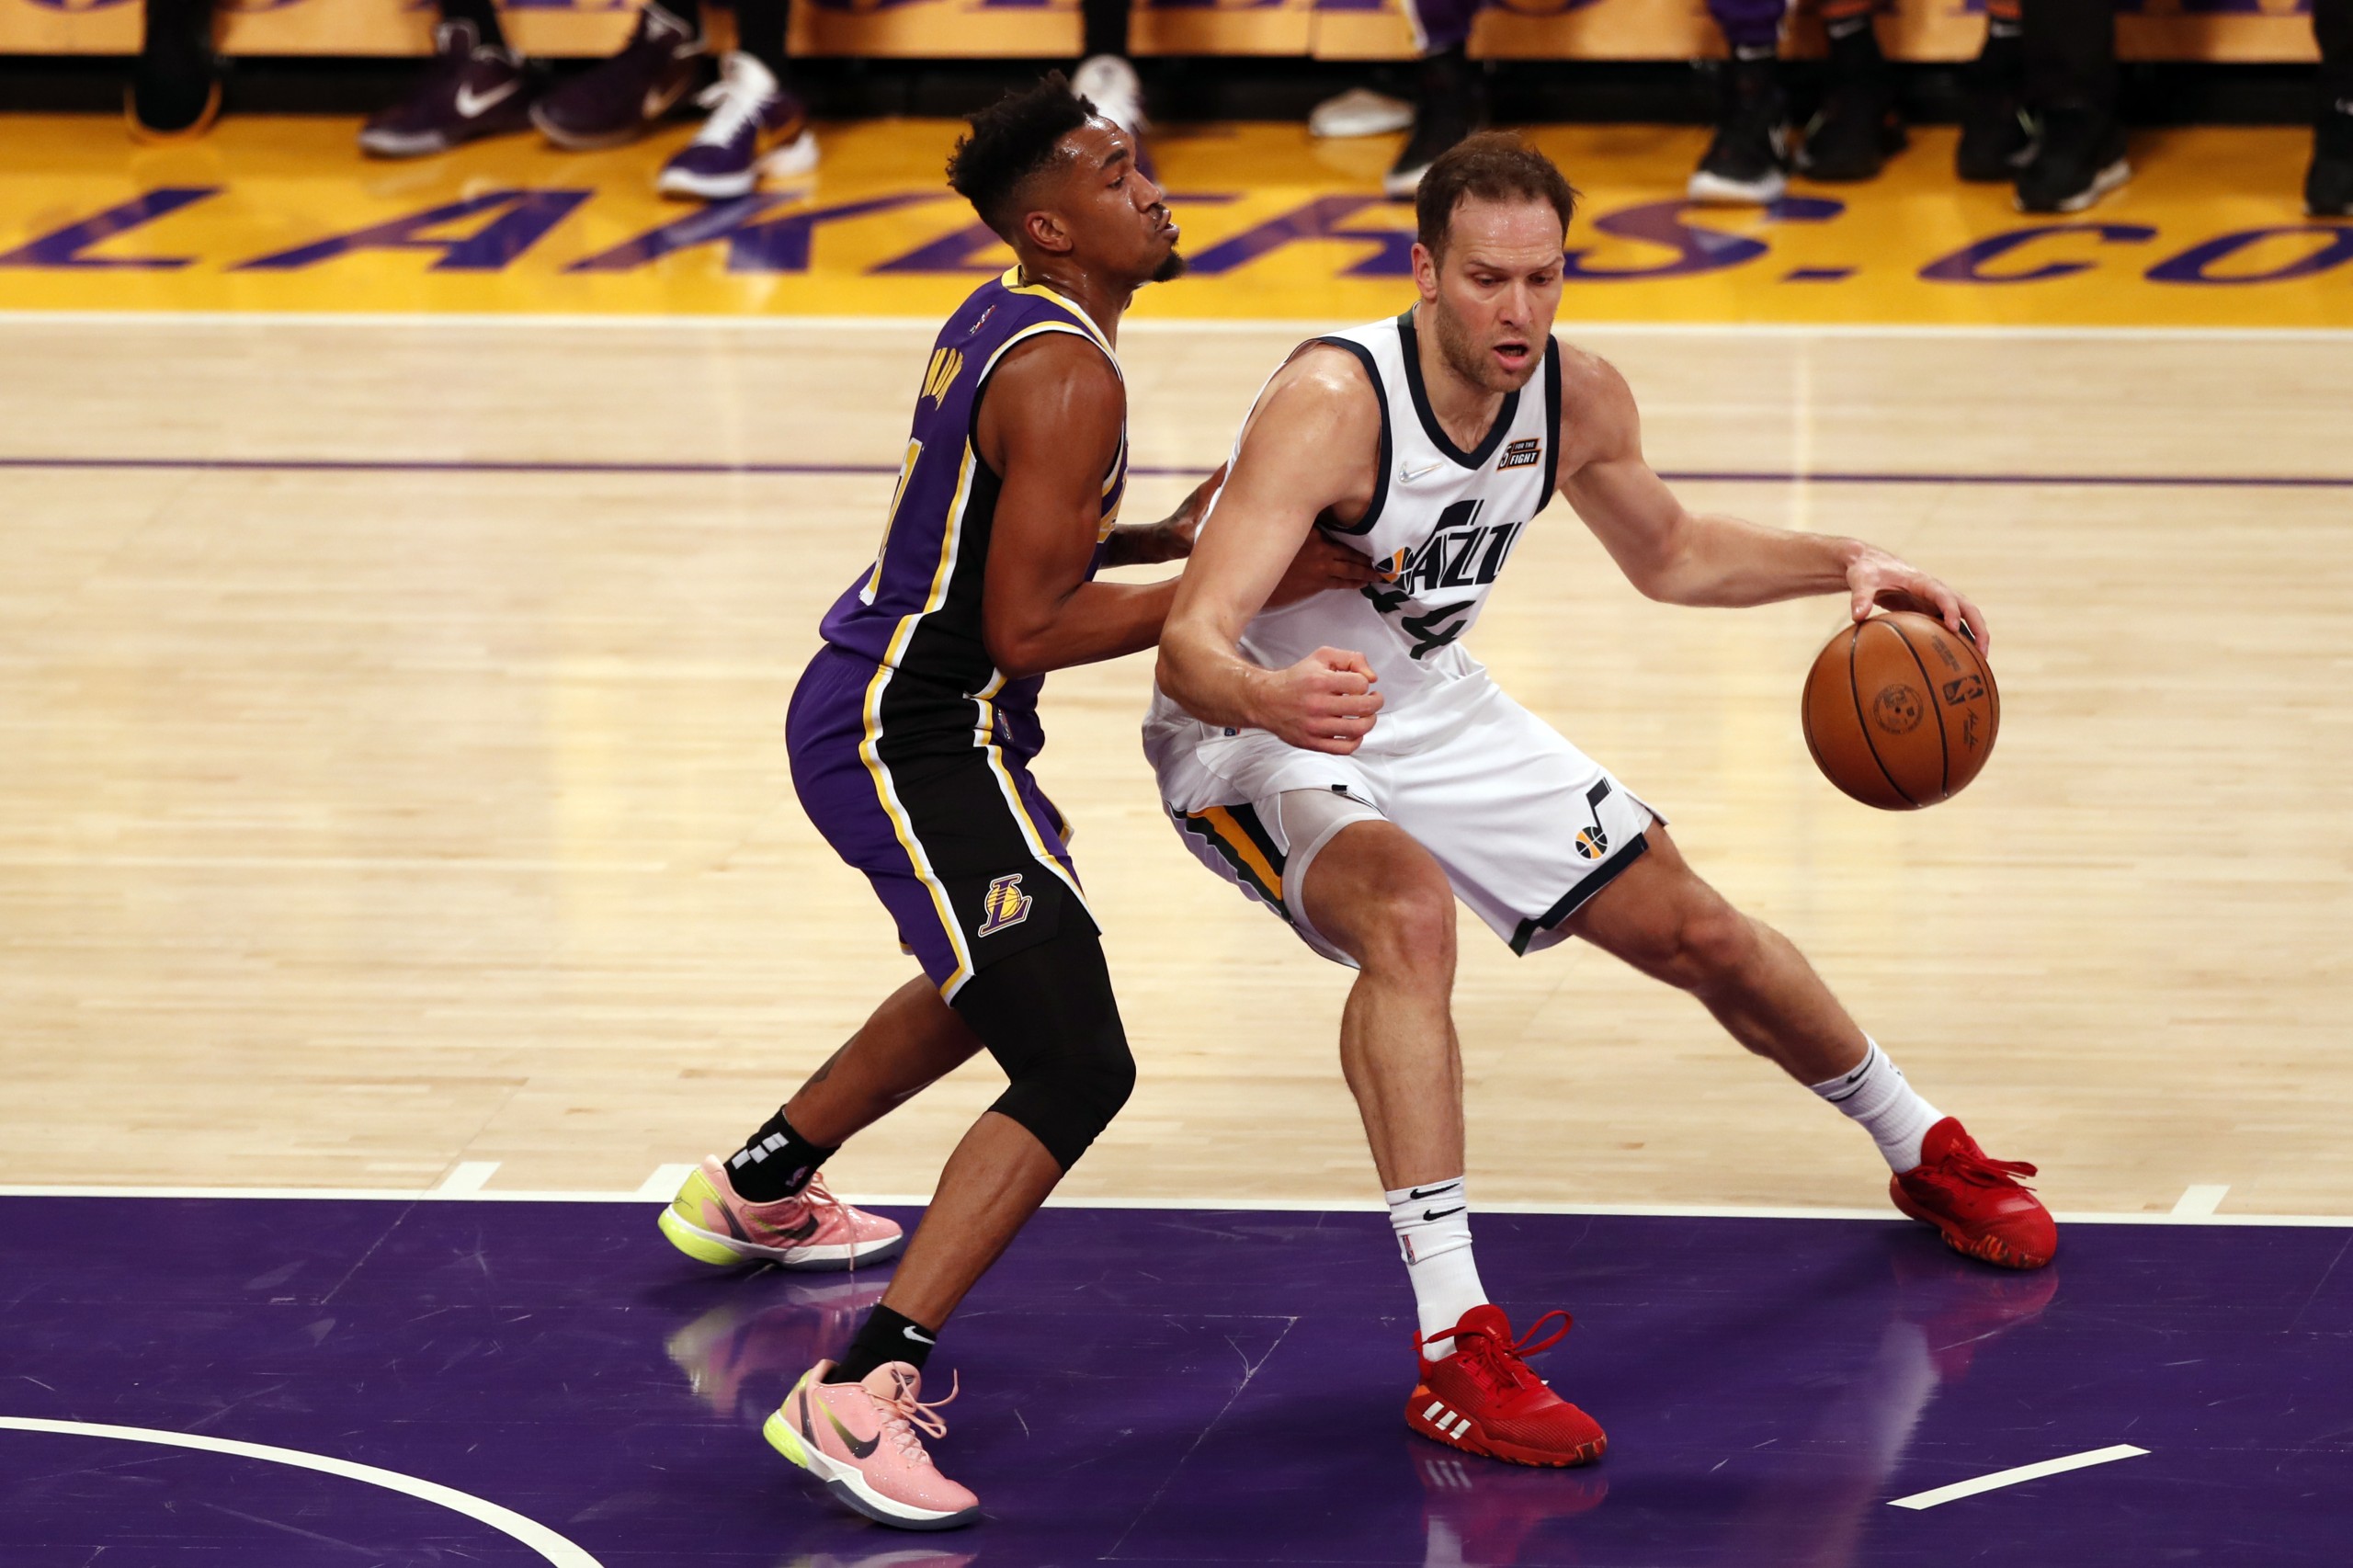 epa09764417 Utah Jazz forward Bojan Bogdanovic (R) in action against Los Angeles Lakers guard Malik Monk (L) during the first quarter of the NBA game between the Los Angeles Lakers and the Utah Jazz at the Crypto.com Arena in Los Angeles, California, USA, 16 February 2022.  EPA/ETIENNE LAURENT  SHUTTERSTOCK OUT